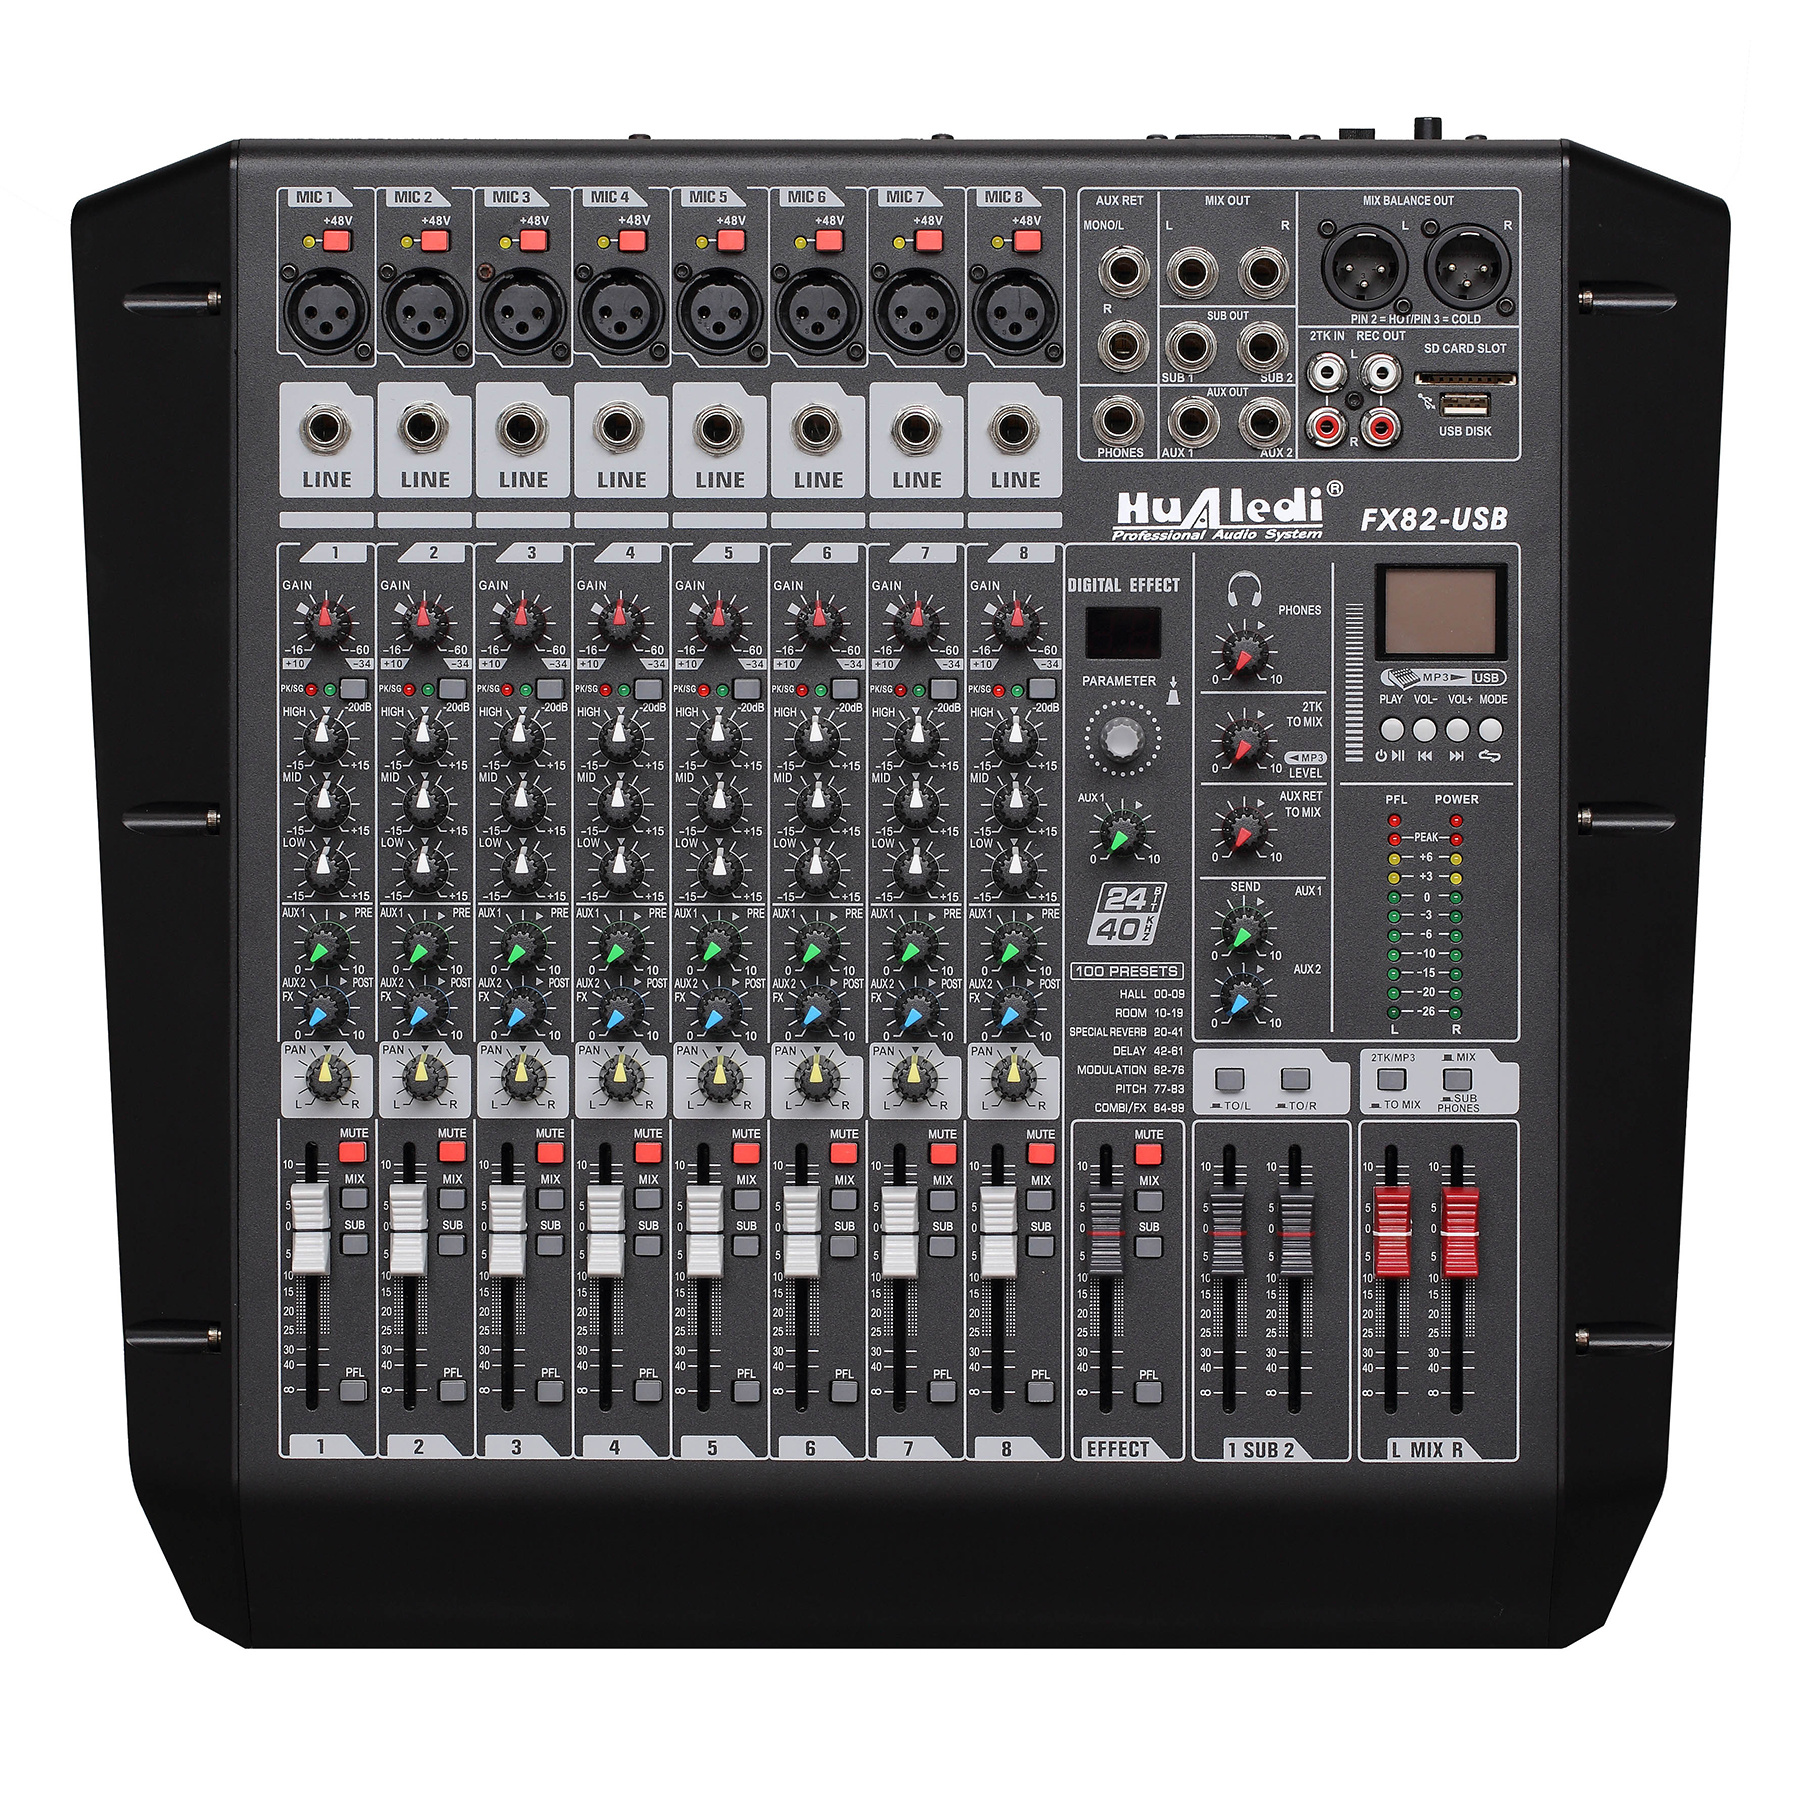 8 channels sound console Two group formation family style